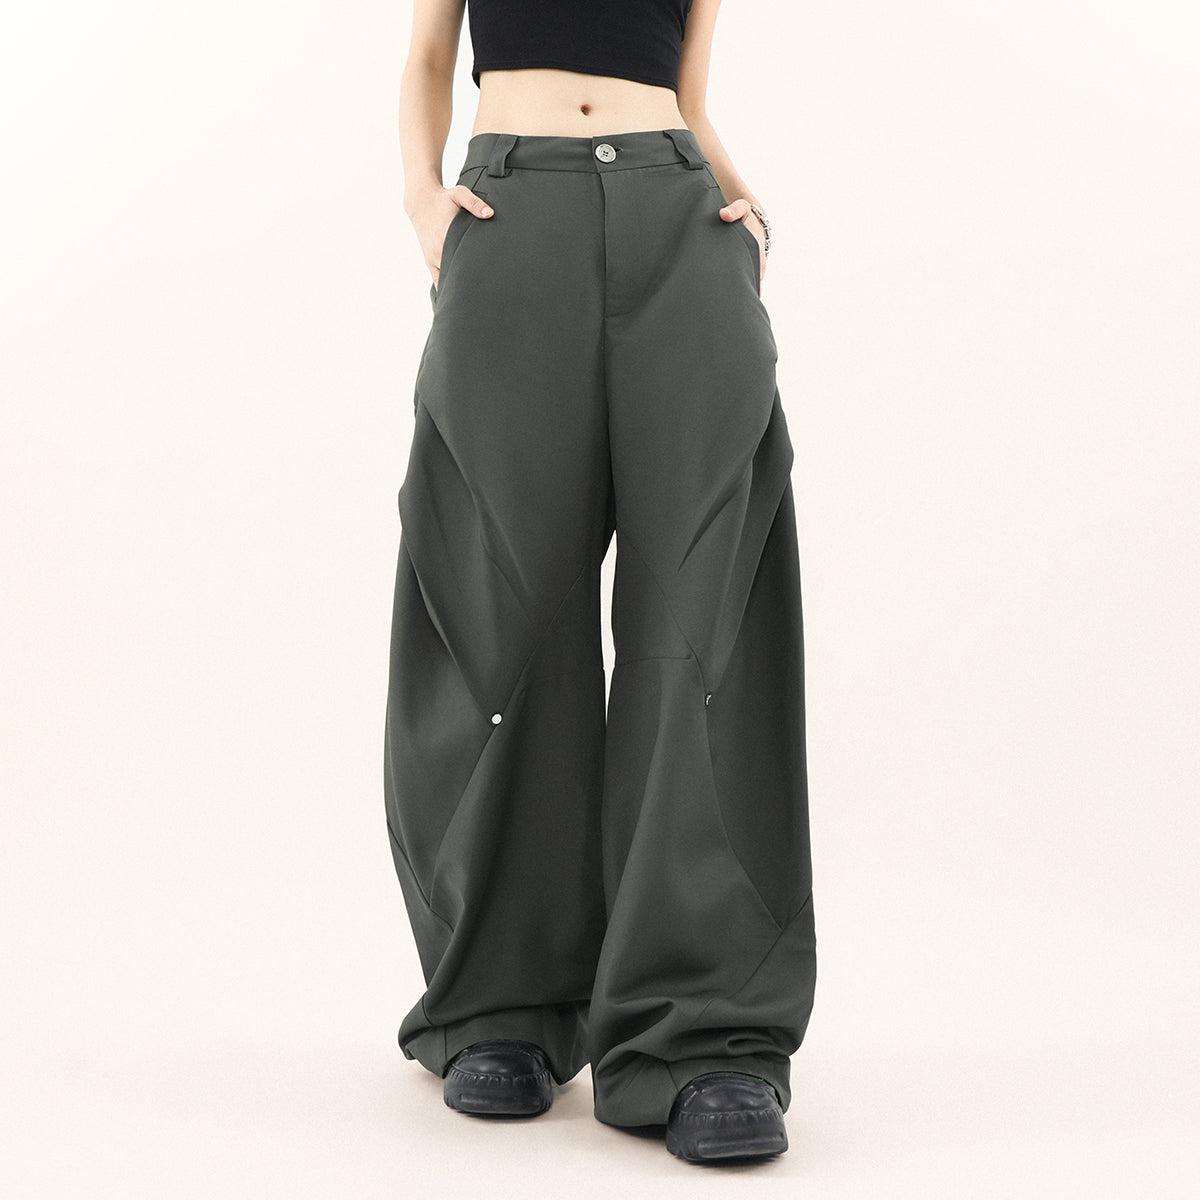 Mr Nearly Button Pleated Loose Trousers Korean Street Fashion Pants By Mr Nearly Shop Online at OH Vault